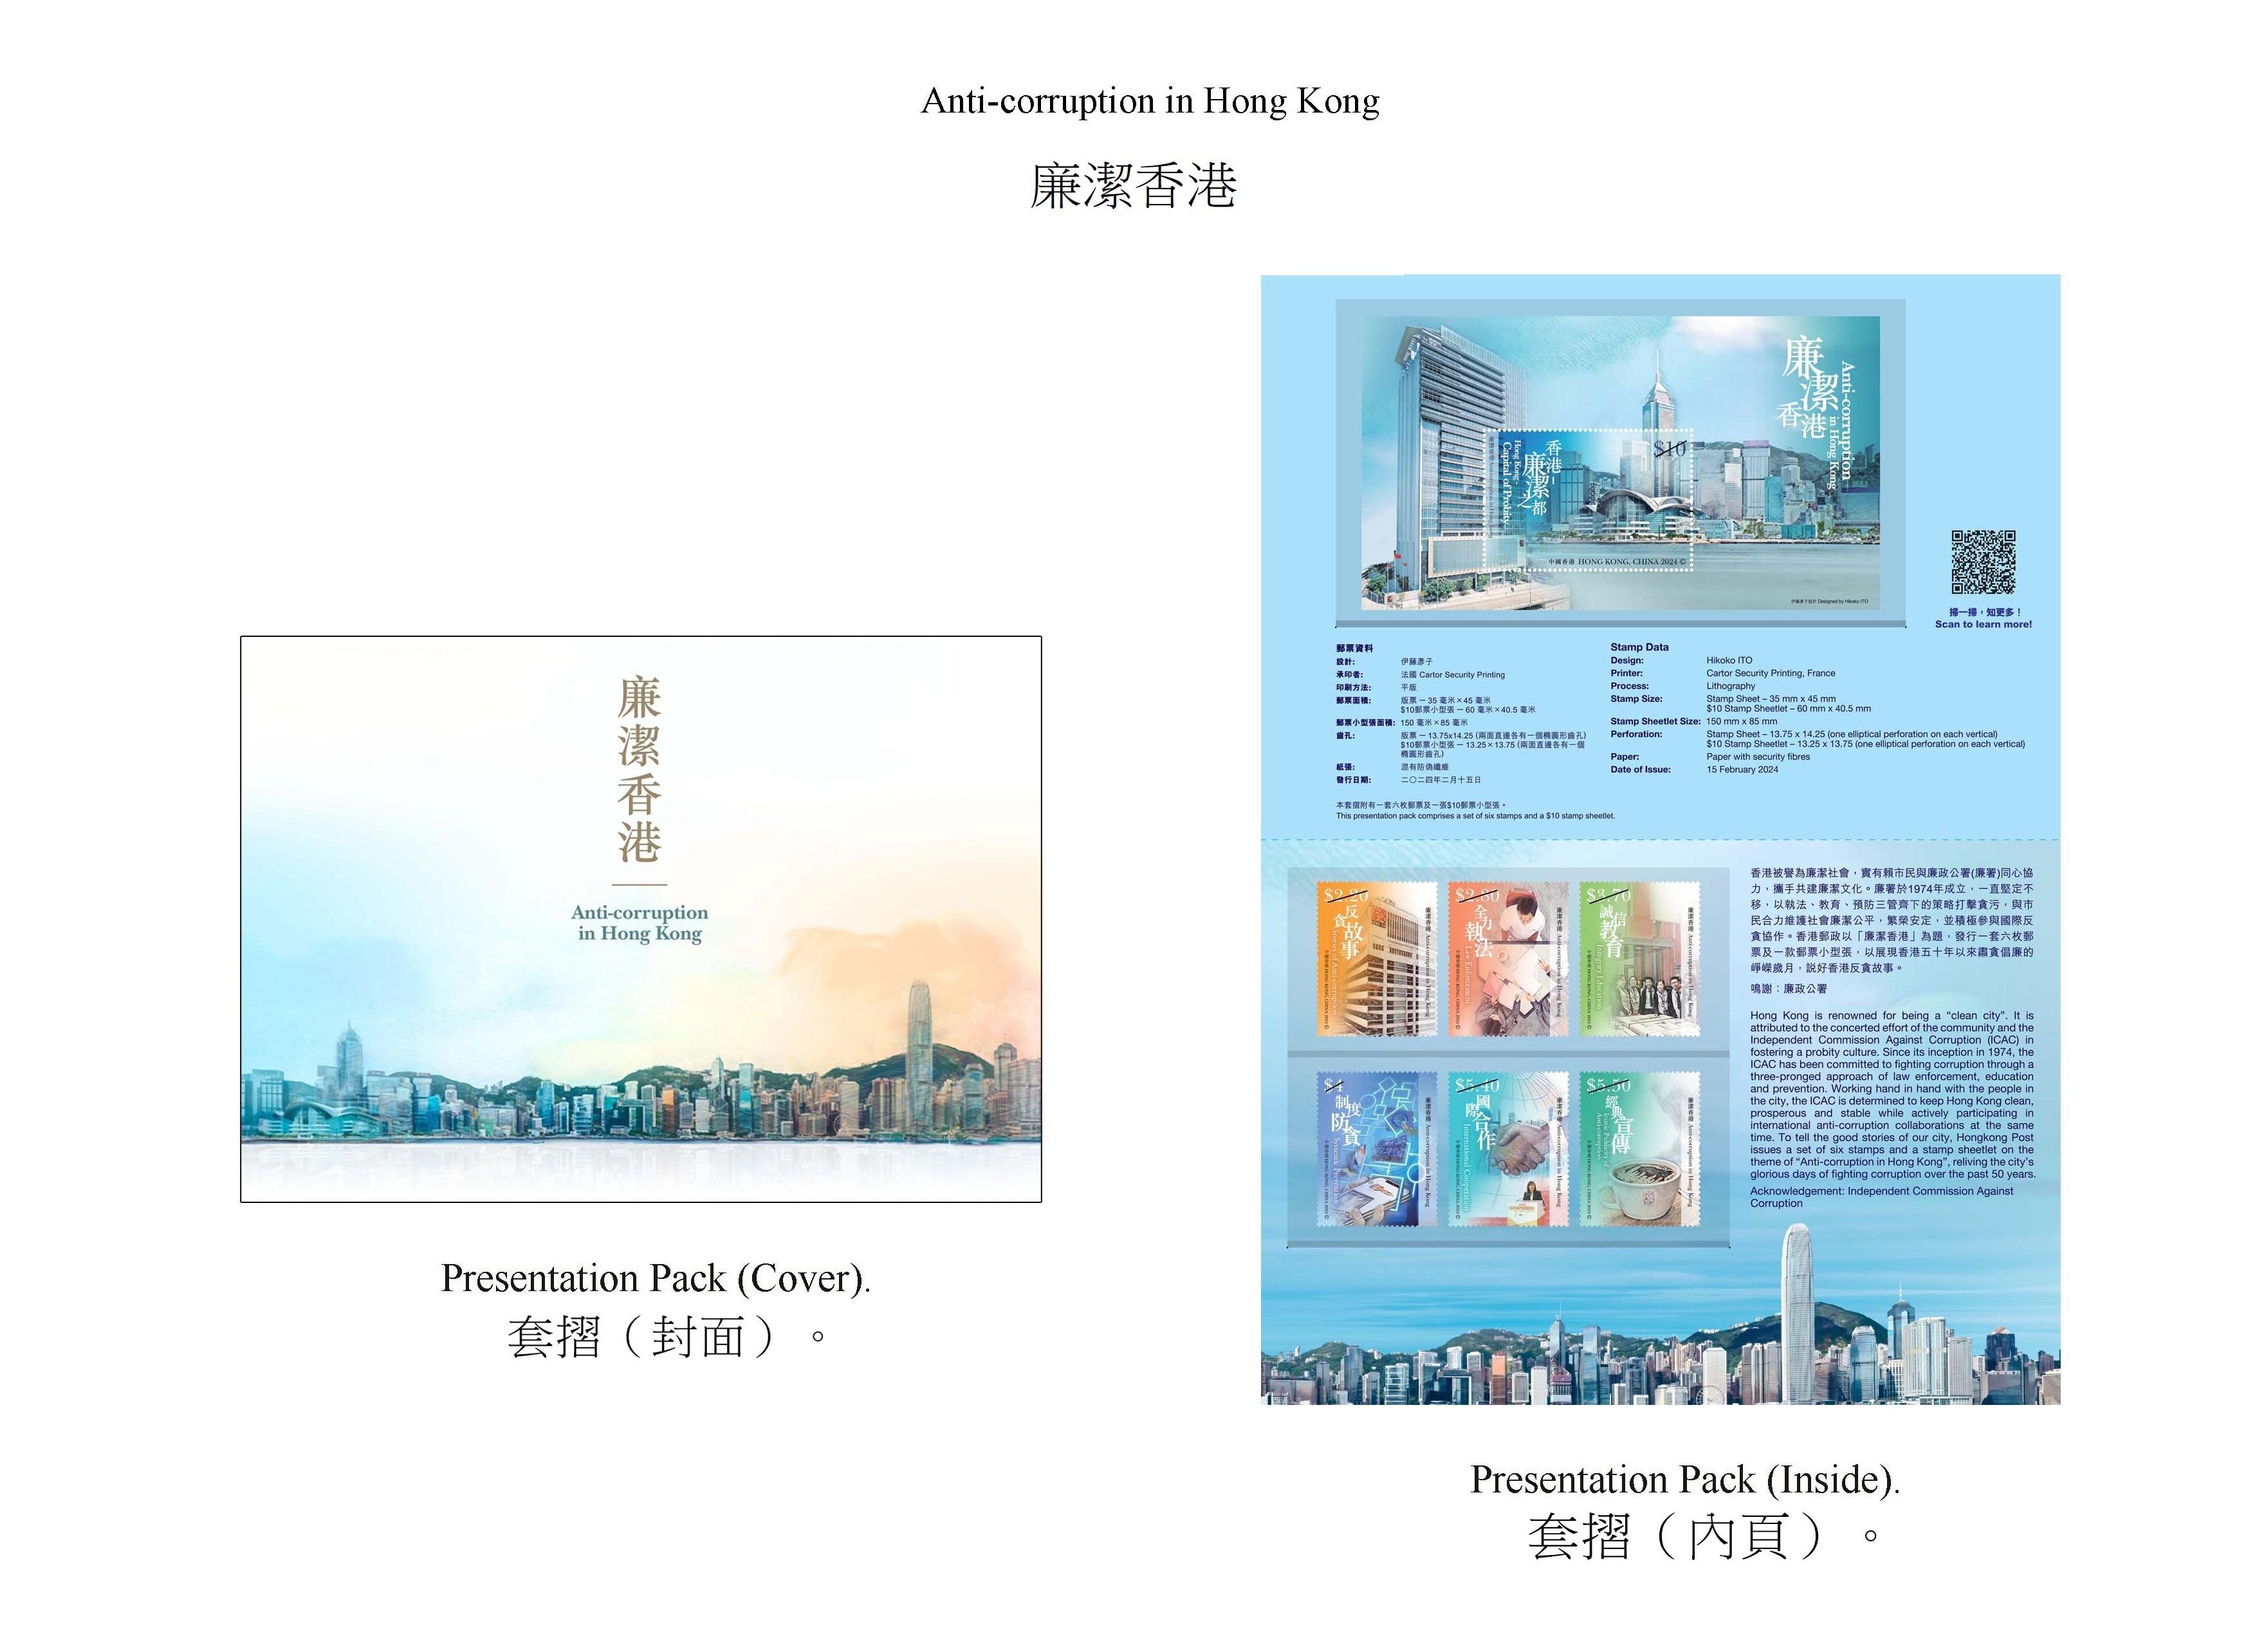 Hongkong Post will launch a special stamp issue and associated philatelic products on the theme of “Anti-corruption in Hong Kong” on February 15 (Thursday).  Photos show the presentation pack.
